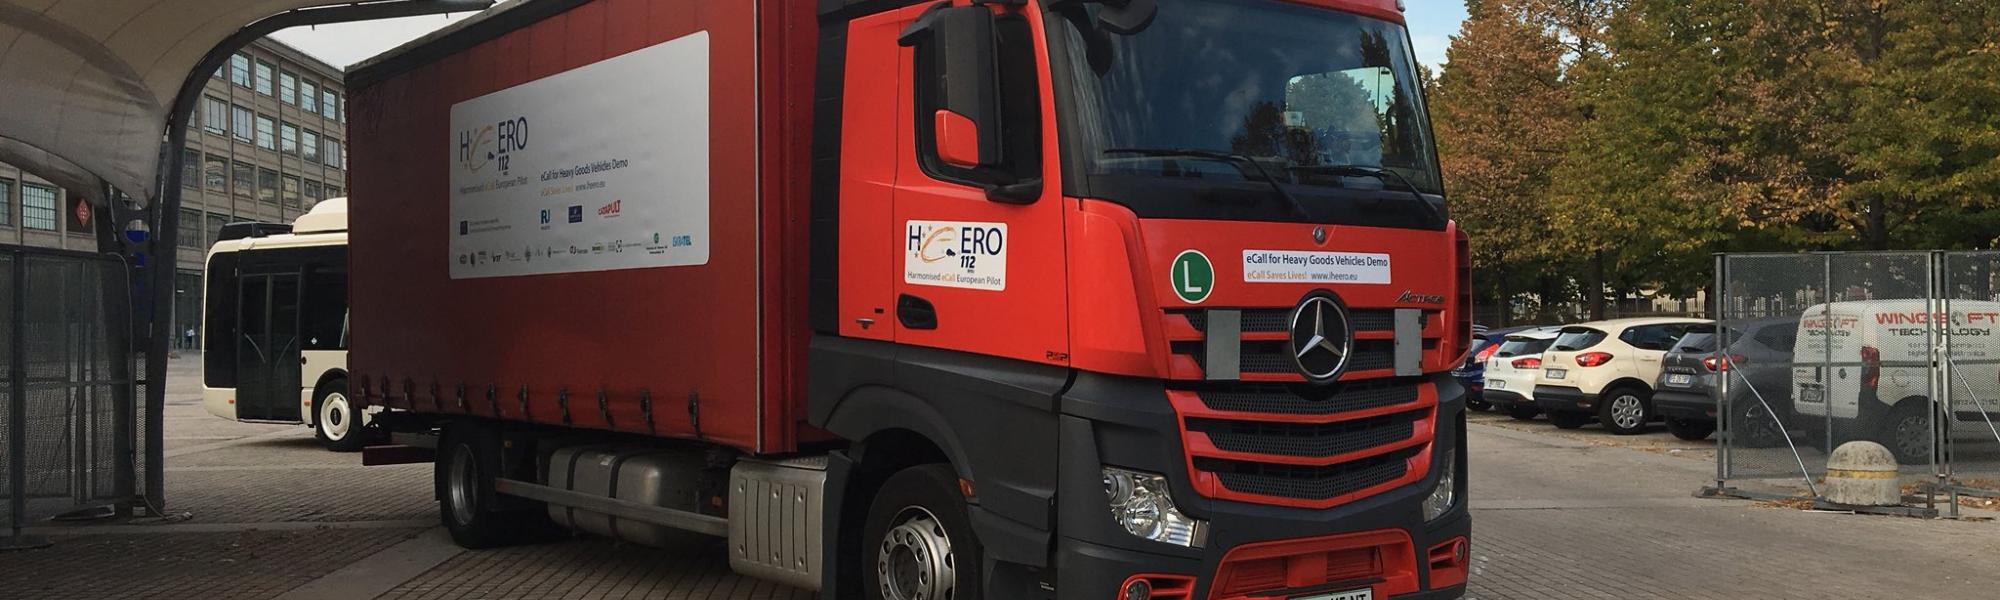 Emergency call demo truck starts tour in Turin